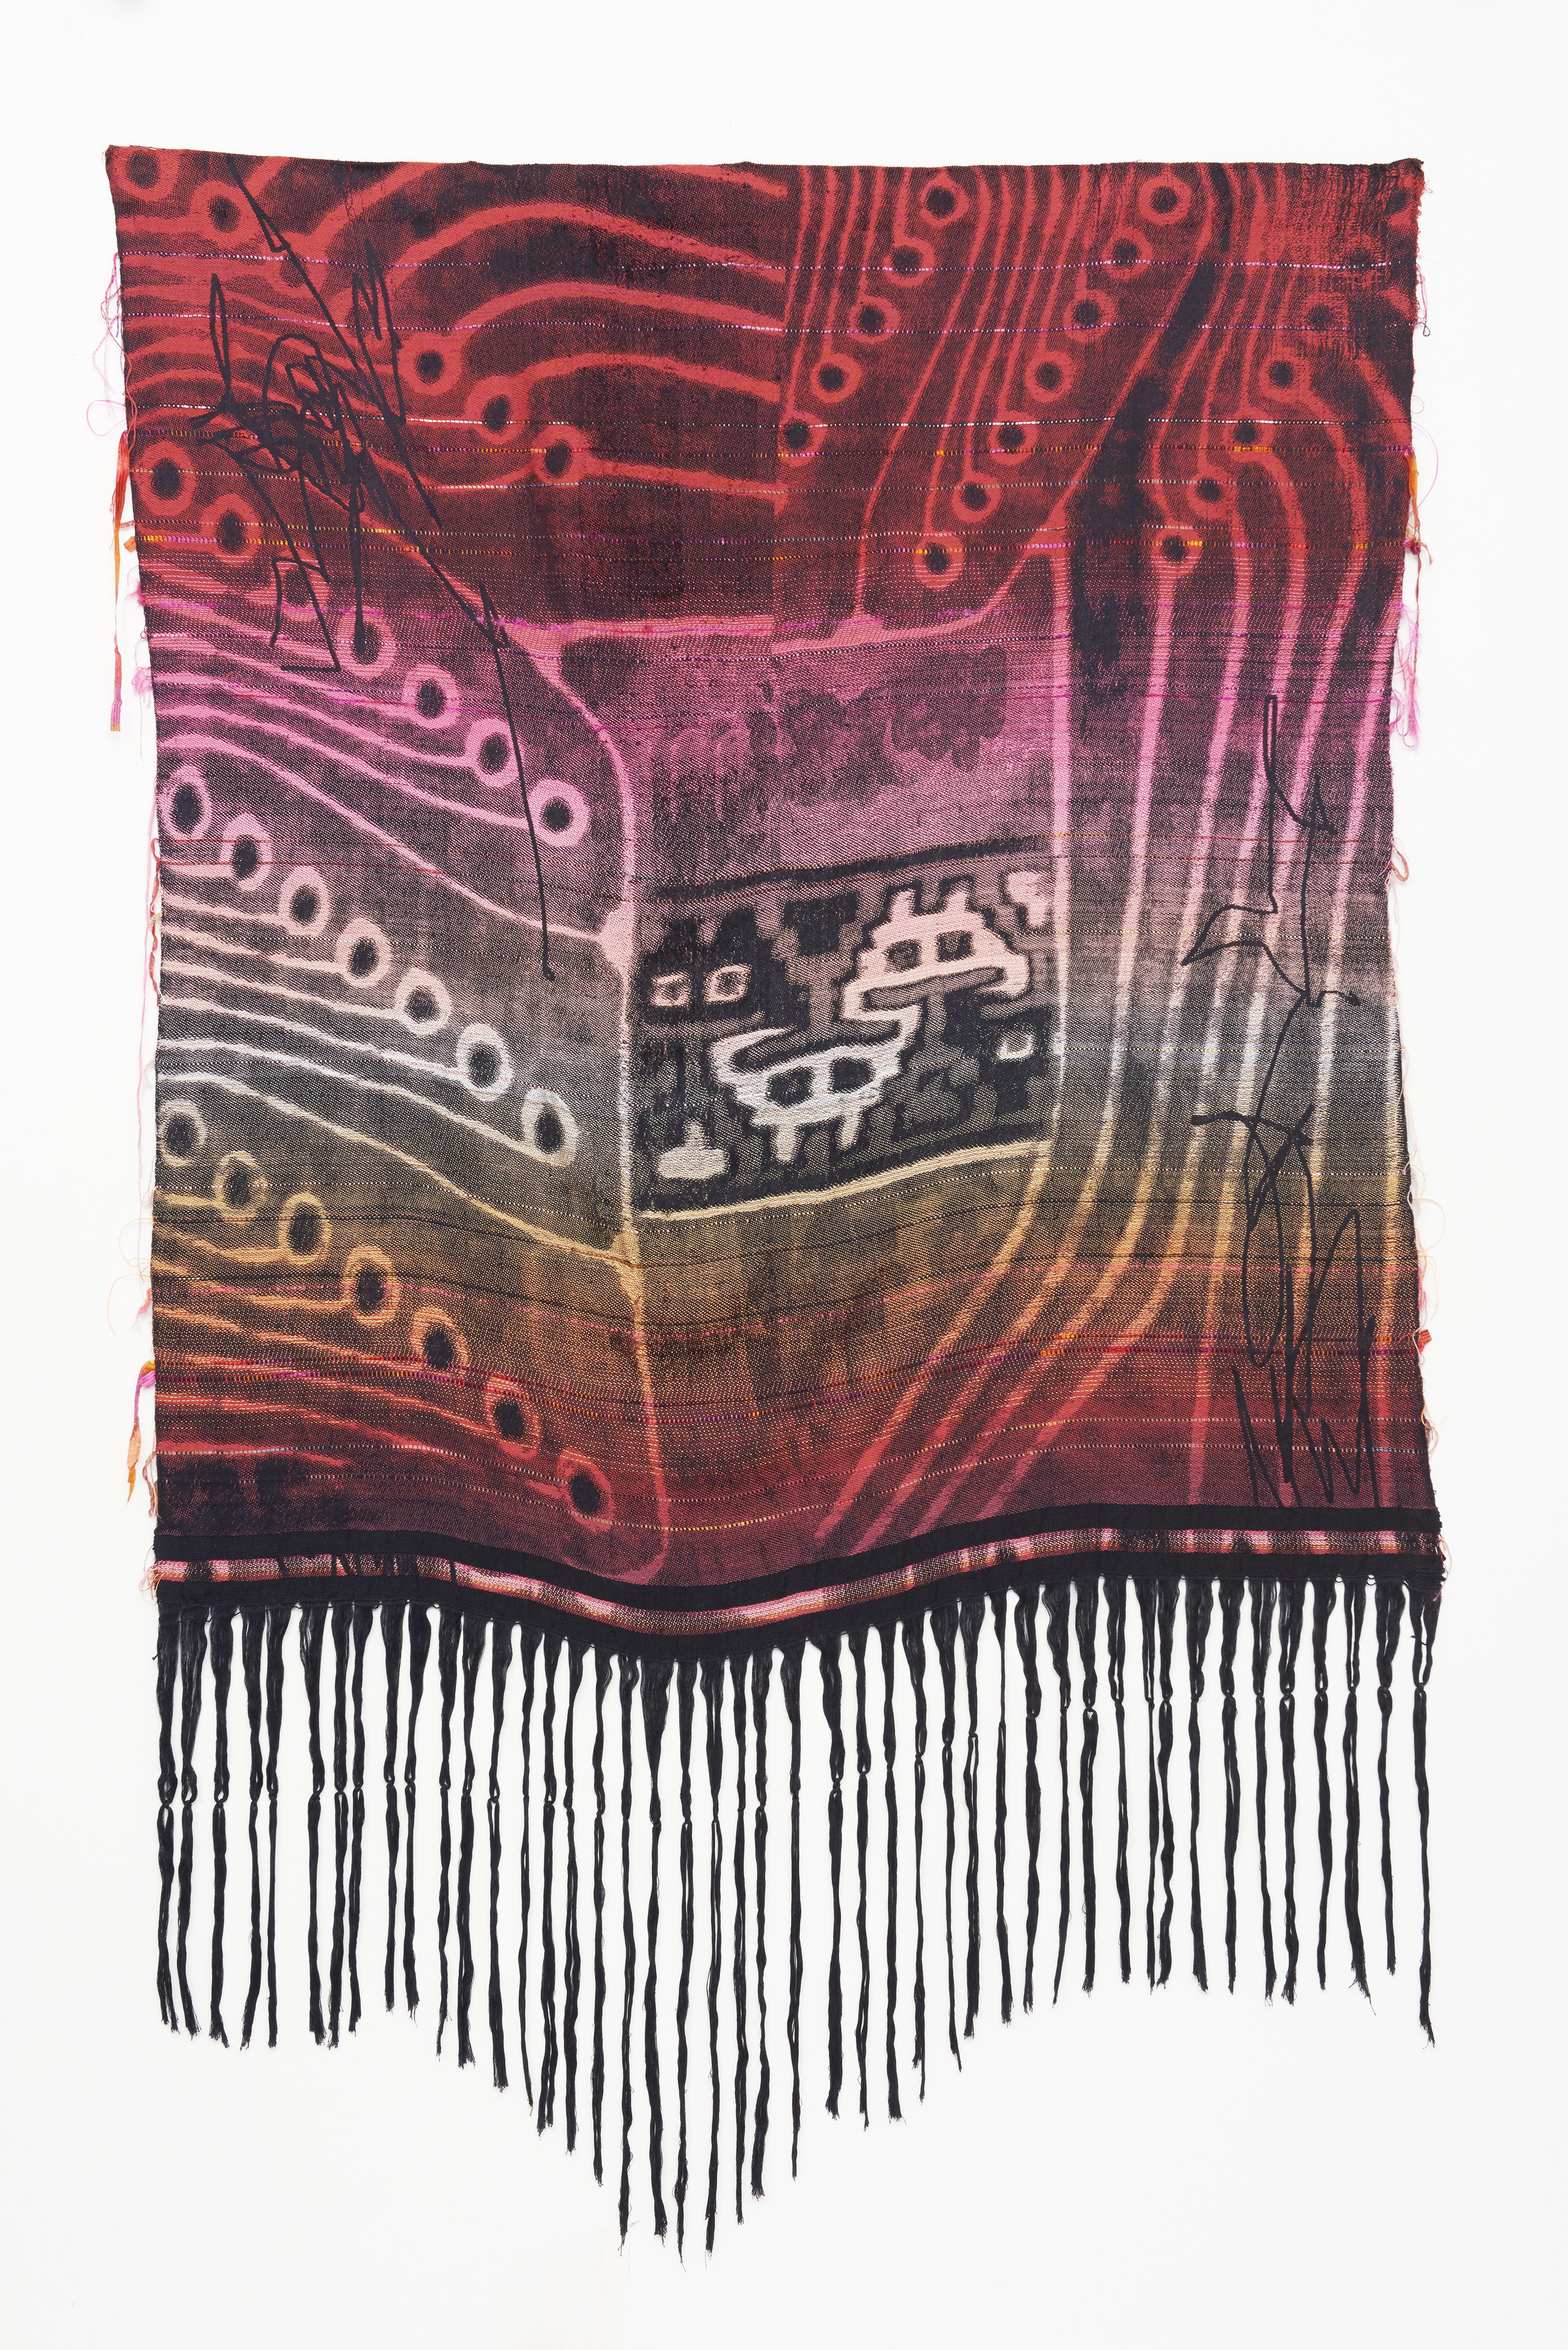  Robin Kang  Encrypted , 2017 Hand Jacquard woven cotte, tencel, and synthetic fibers 87 x 53 in 